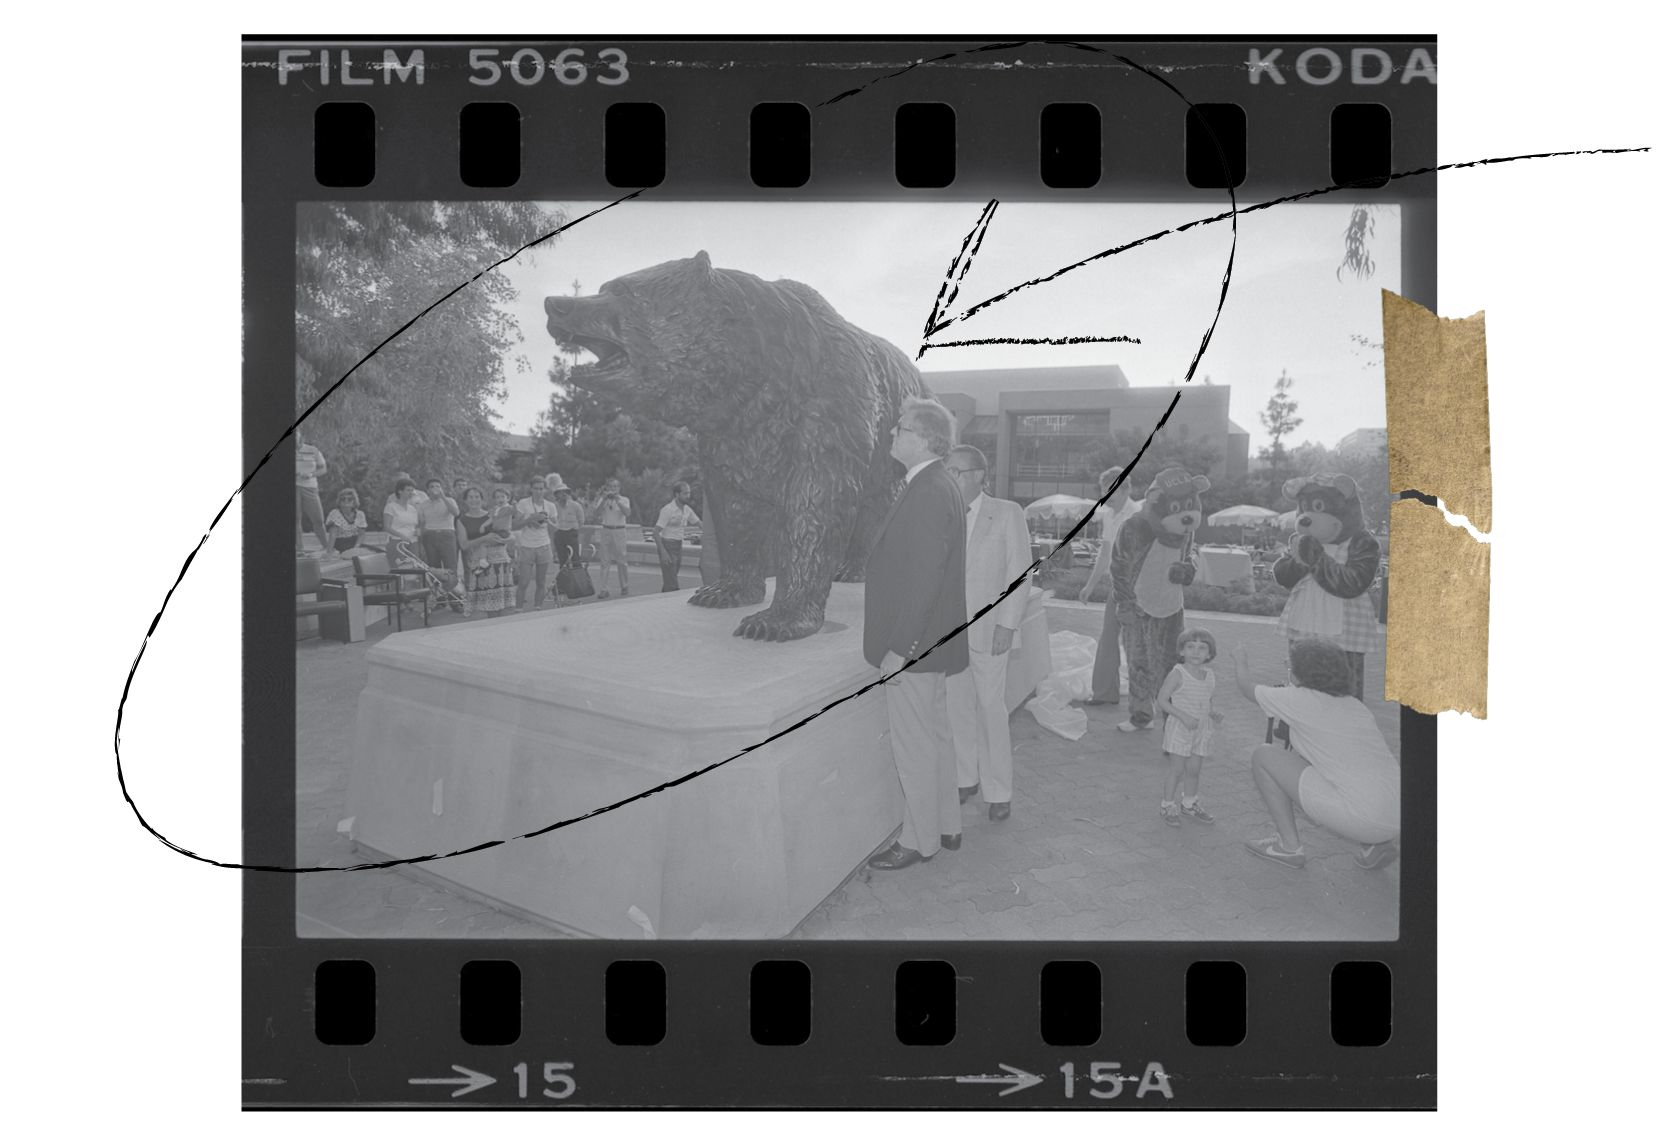 A black and white photograph of Charles E. Young, onlookers, and two people in bear costumes.